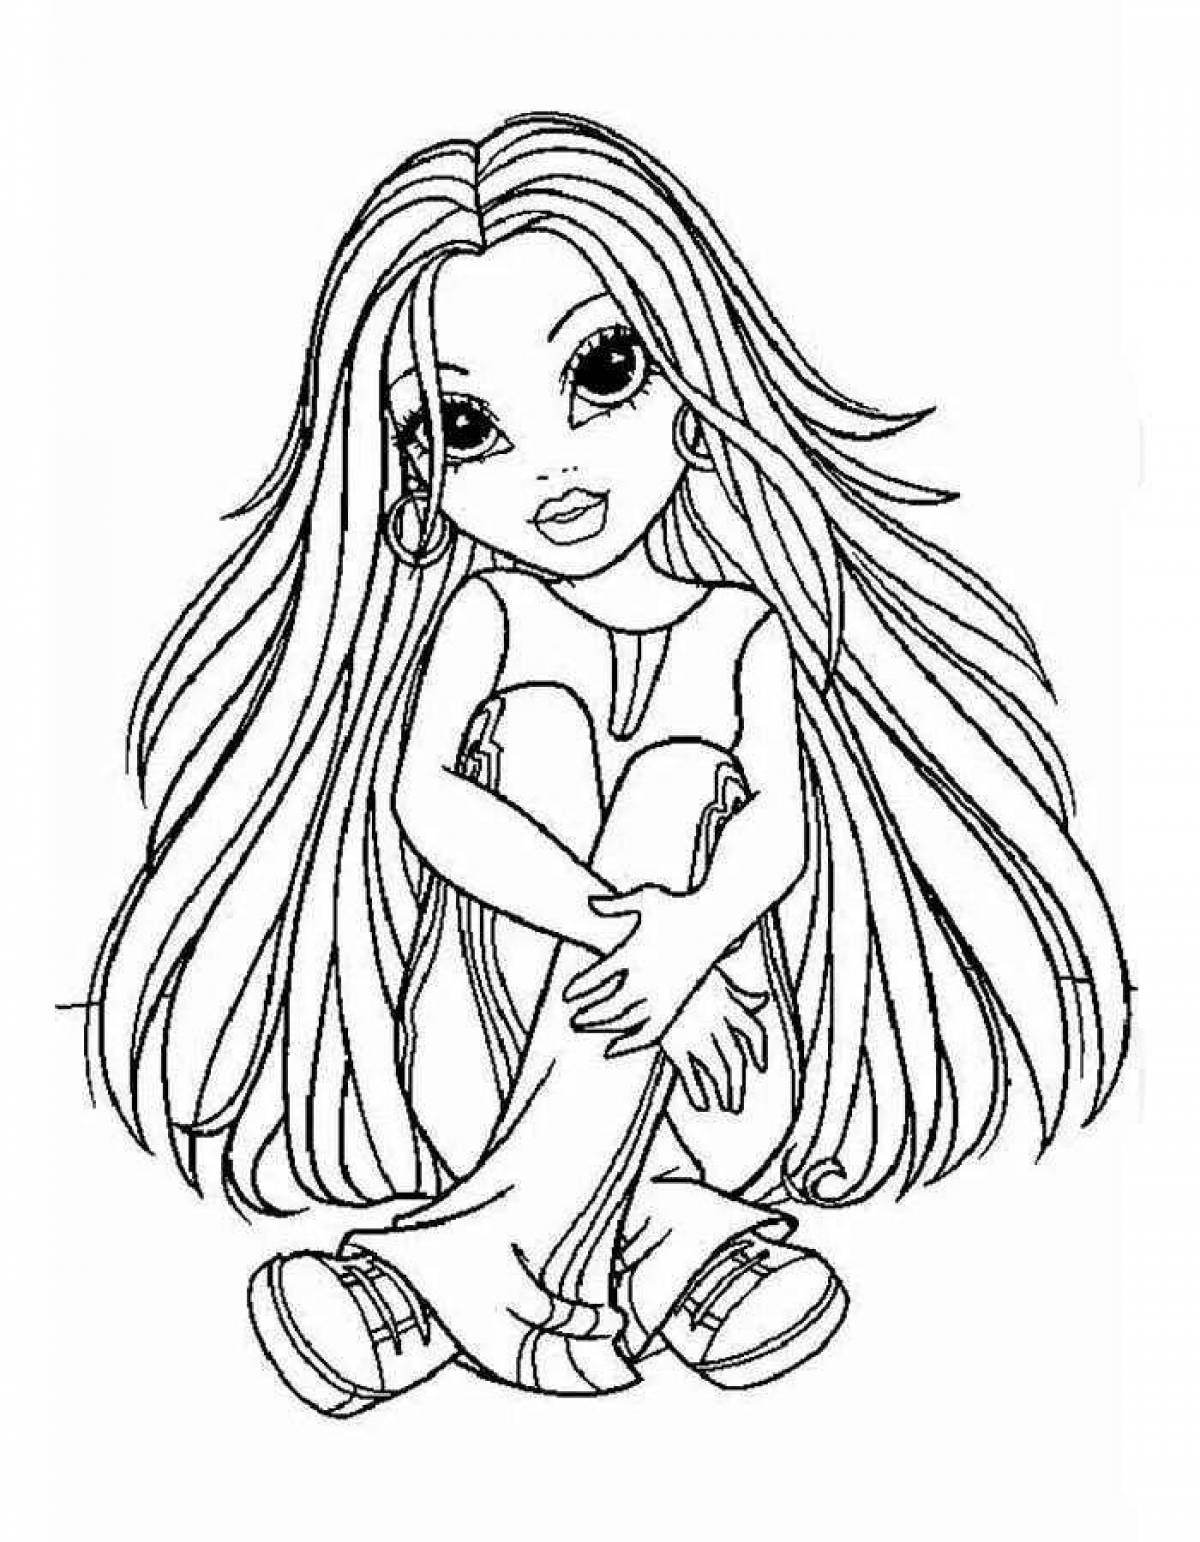 Dazzling coloring pages for girls 12 years old